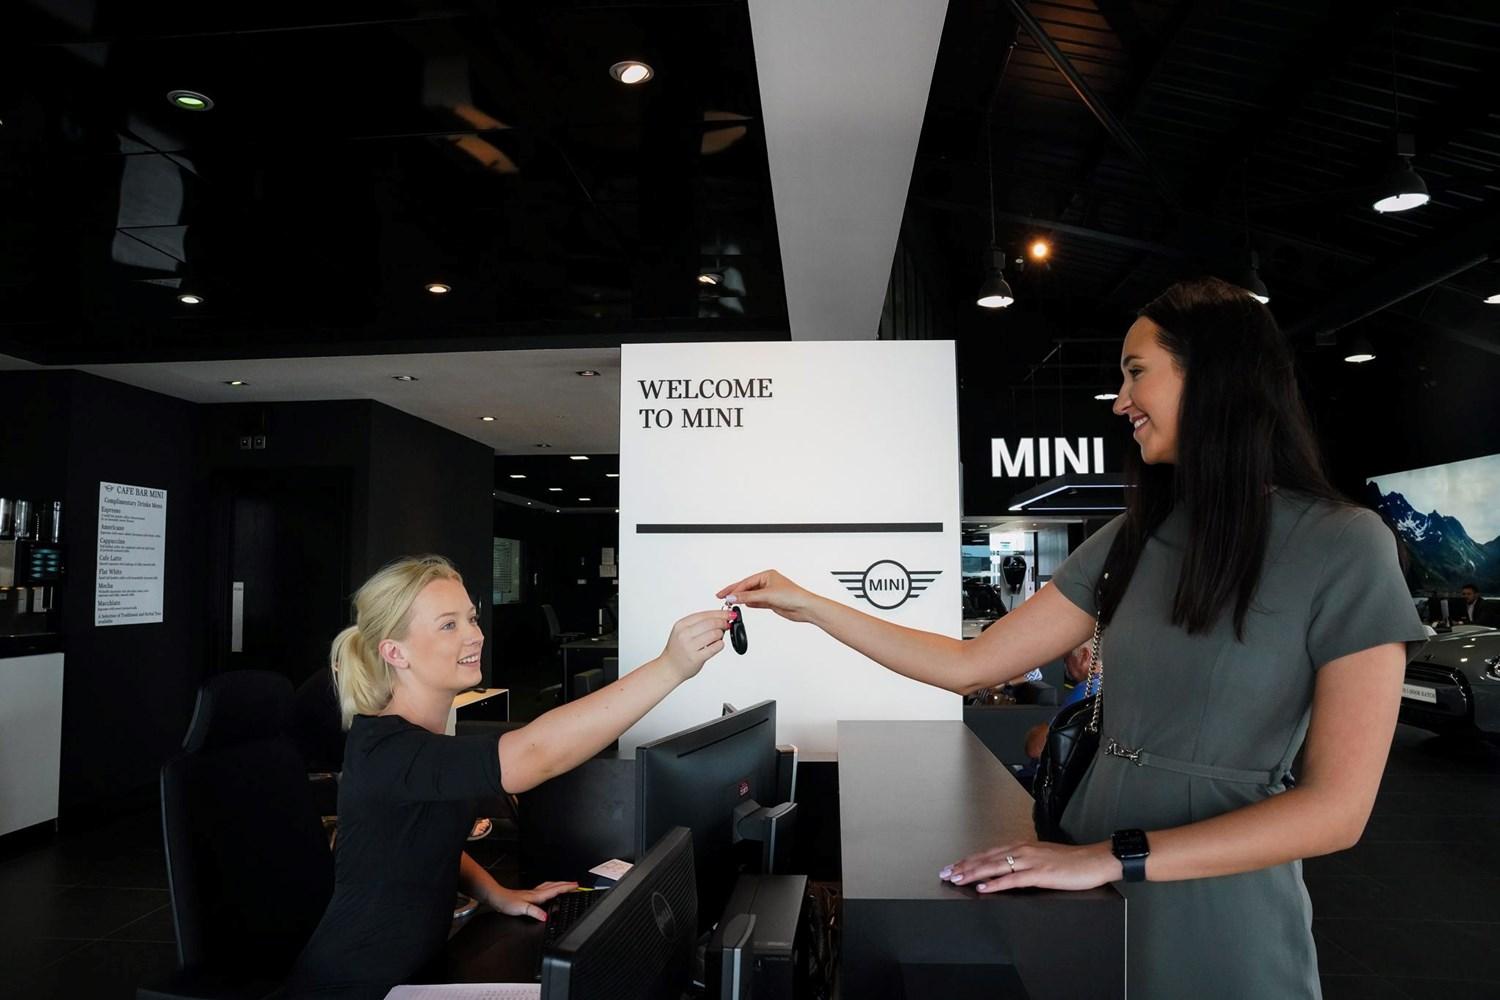 MINI Sales Specialist hands over new car keys to customer at the Bavarian MINI Showroom reception